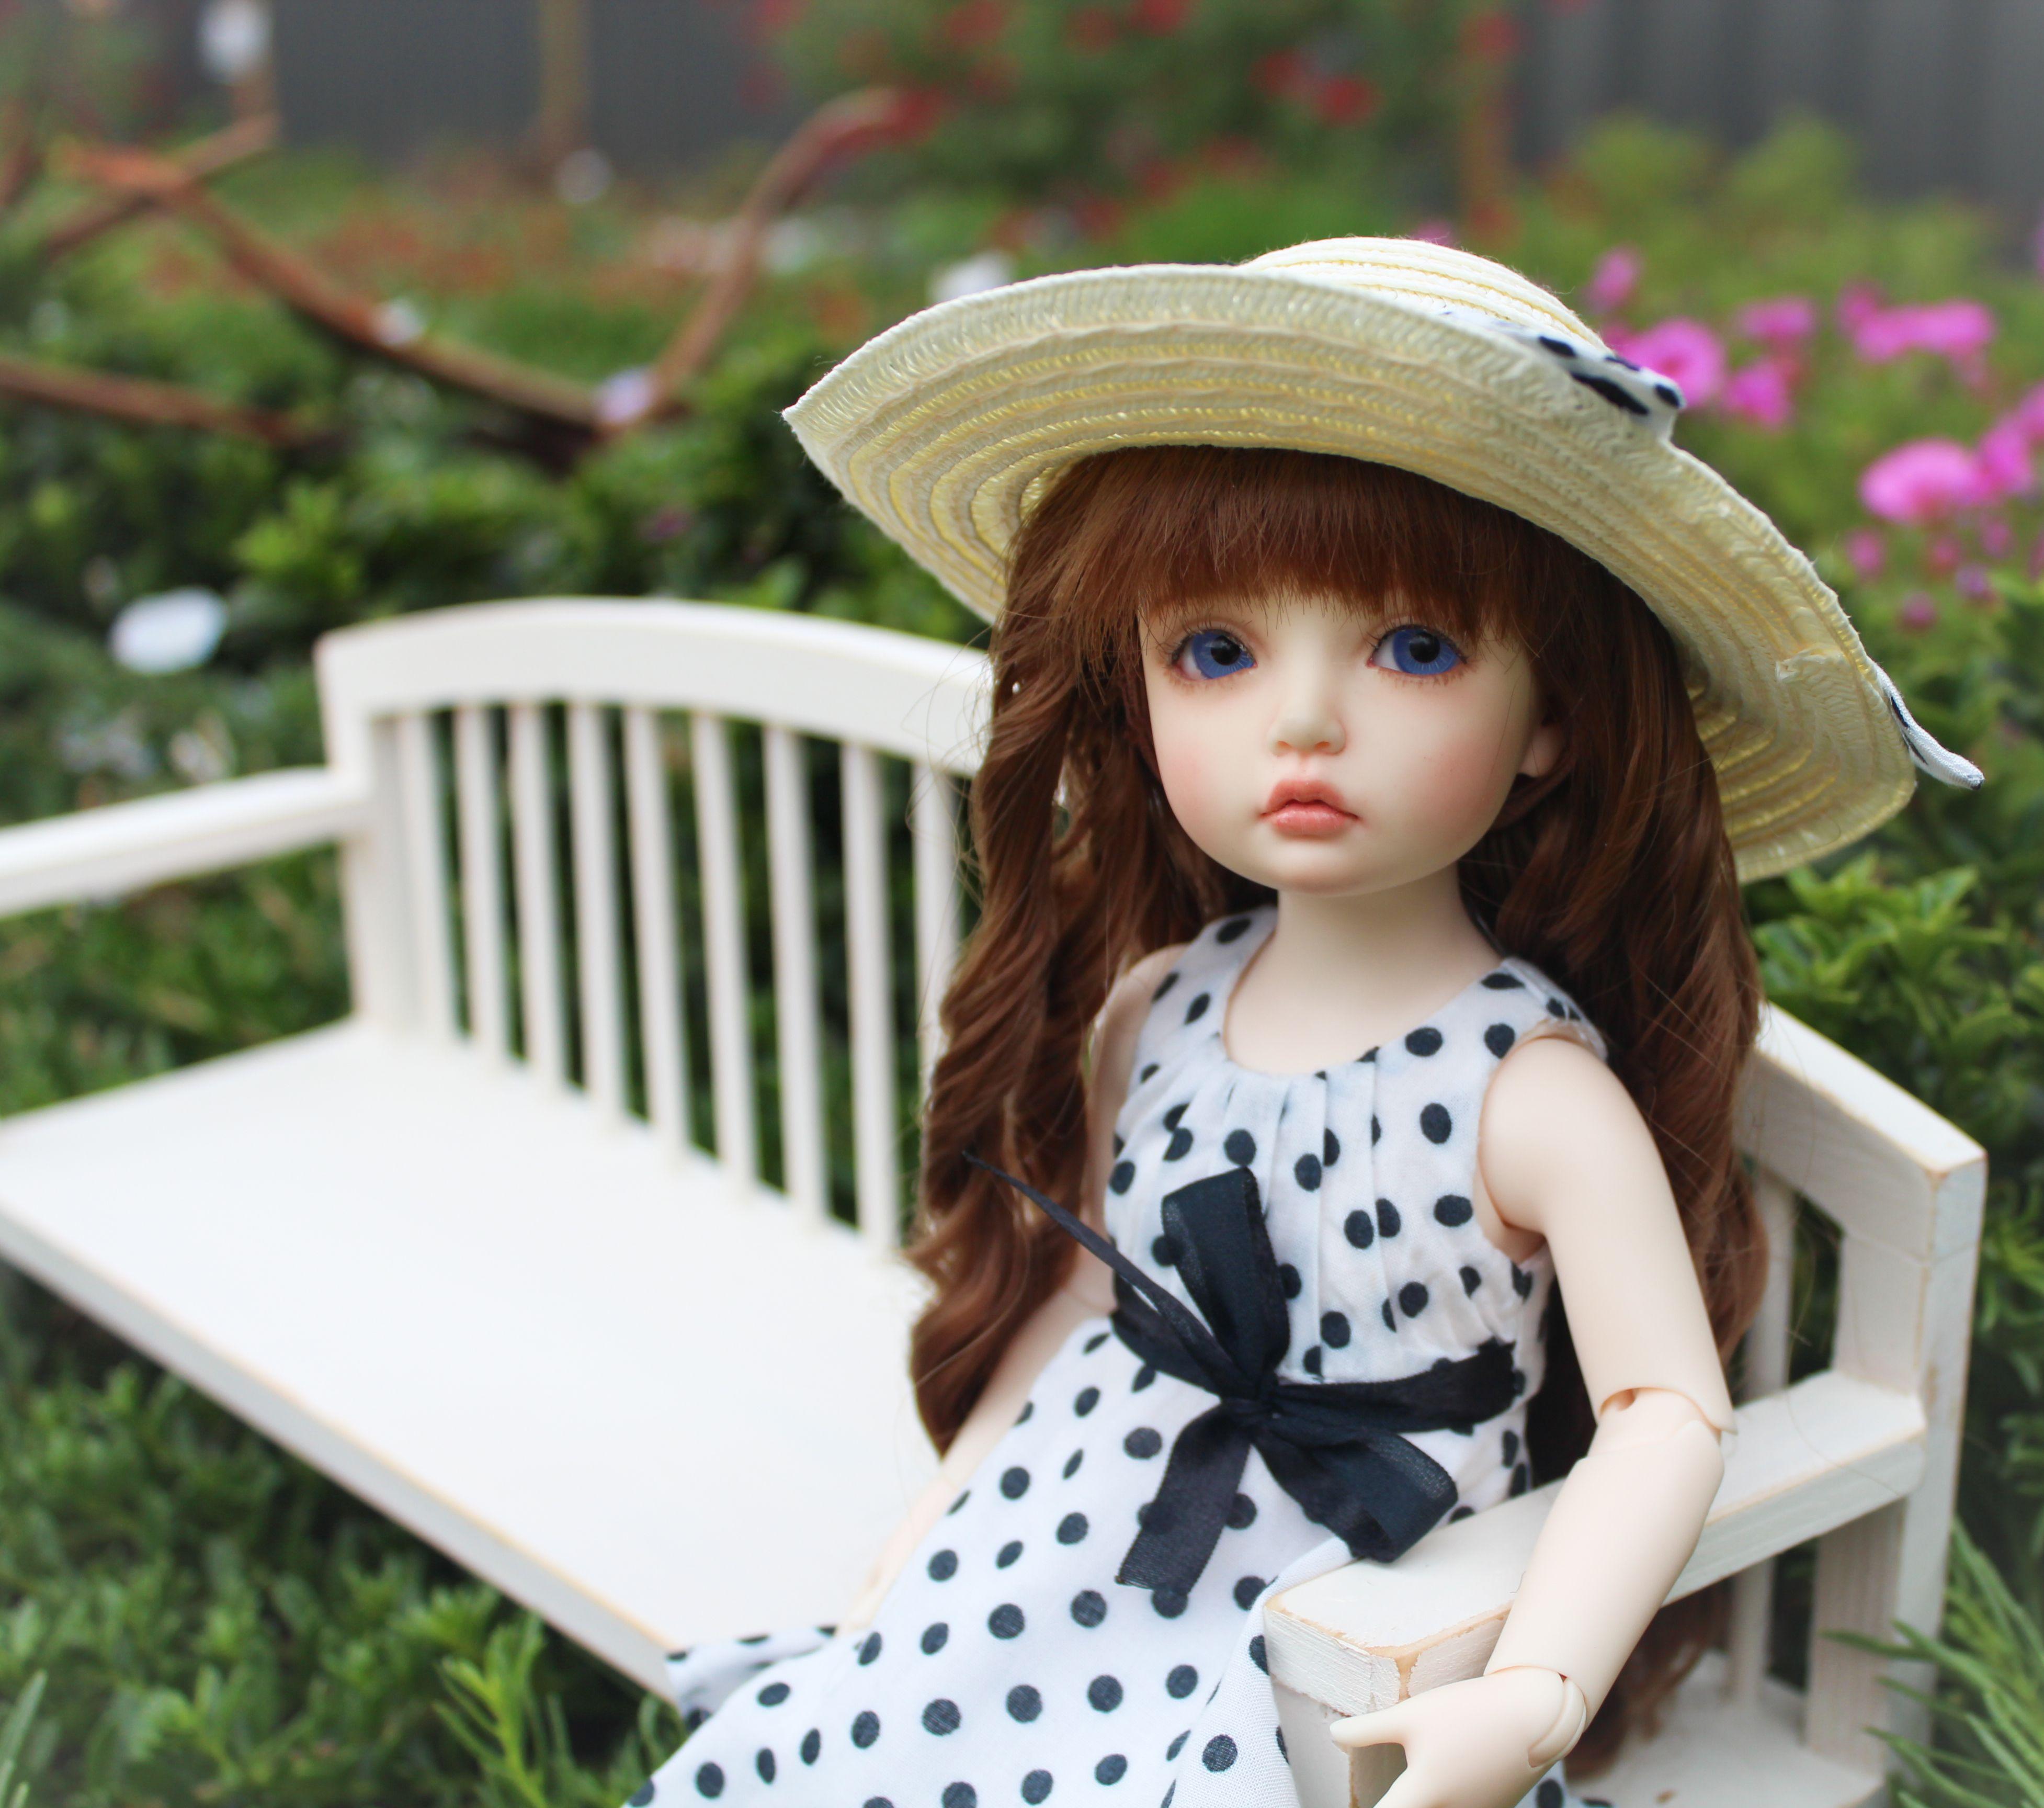 Download Cute Doll Wallpaper For Facebook Cover High Definition